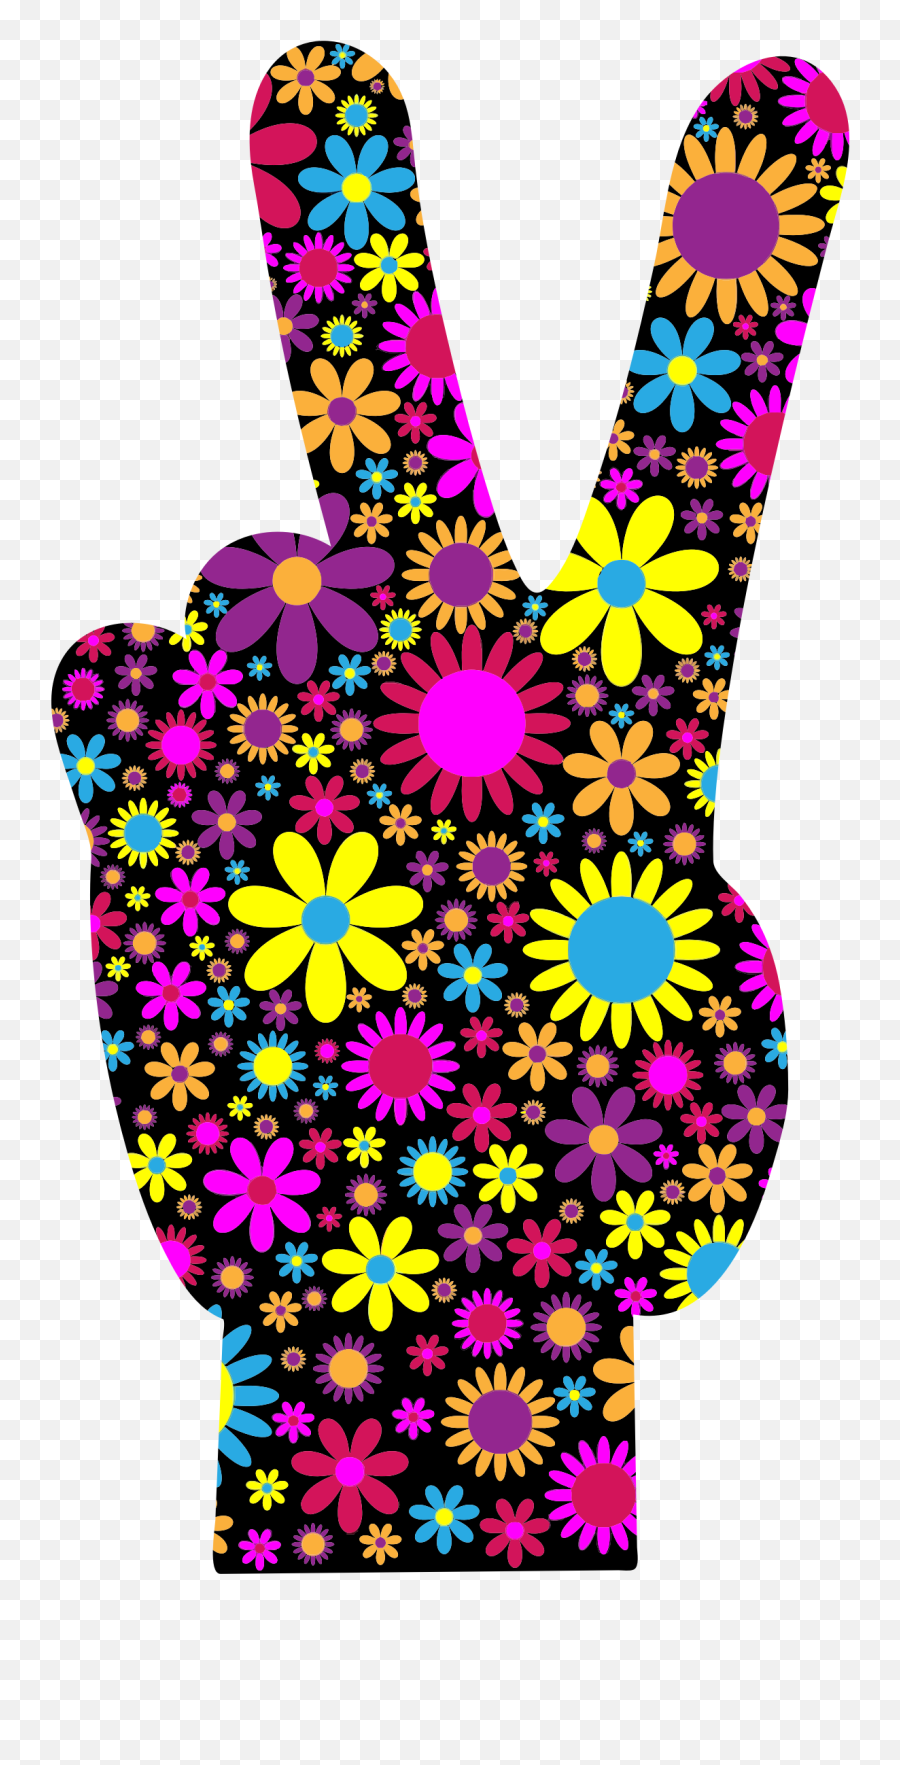 Transparent Peace Sign Png Clipart - Peace Sign With Flowers,Peace Sign Transparent Background